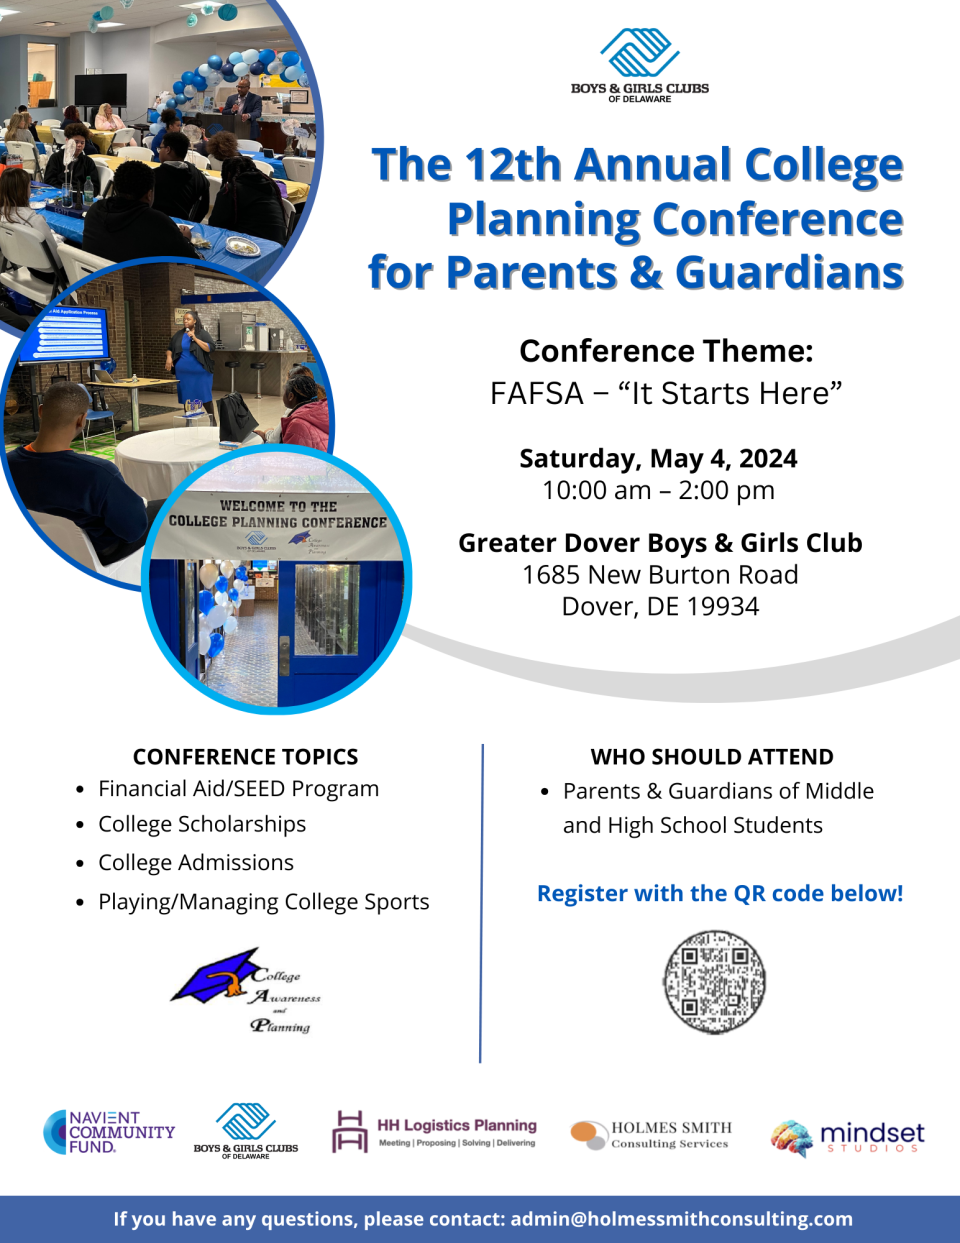 Boys & Girls Clubs of Delaware, alongside partner organization Navient — a firm in technology-enabled education finance and business processing solutions — will take over the Greater Dover Boys & Girls Club building from 10 a.m. to 2 p.m. on Saturday, May 4, for a college planning conference.